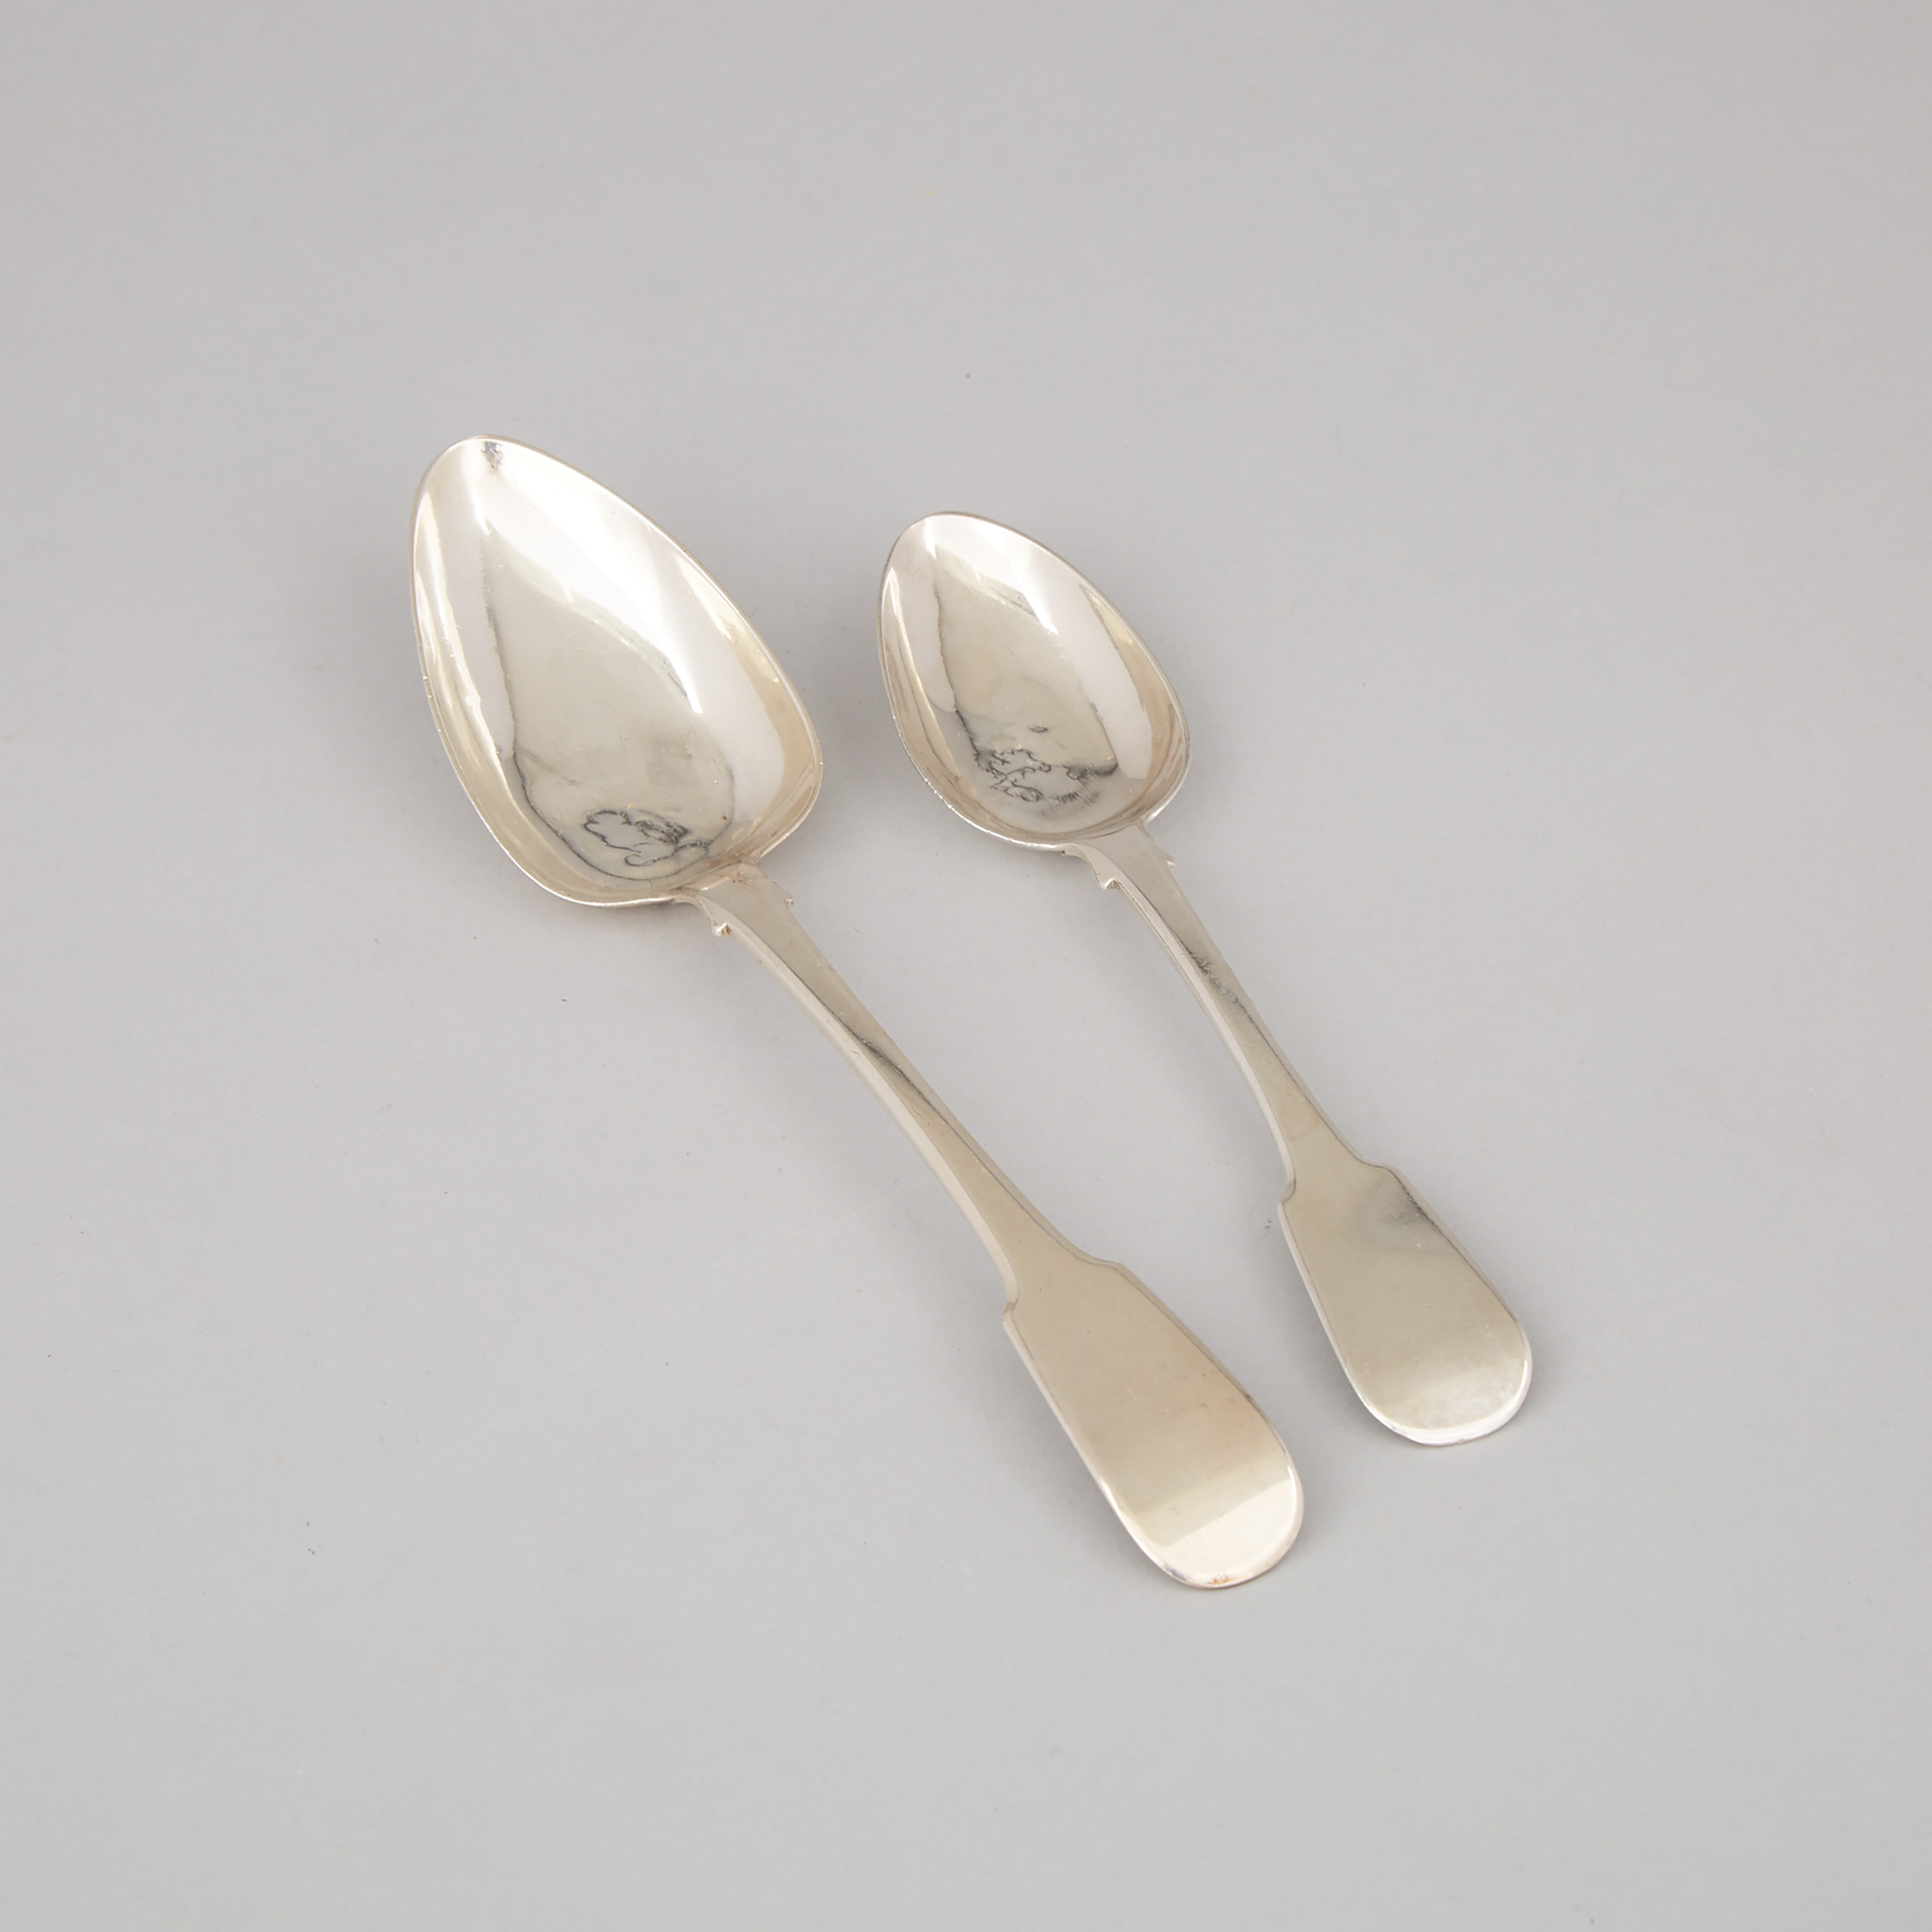 Canadian Silver Fiddle Pattern Table Spoon and a Dessert Spoon, Laurent Amiot, Quebec City, Que., c.1830 